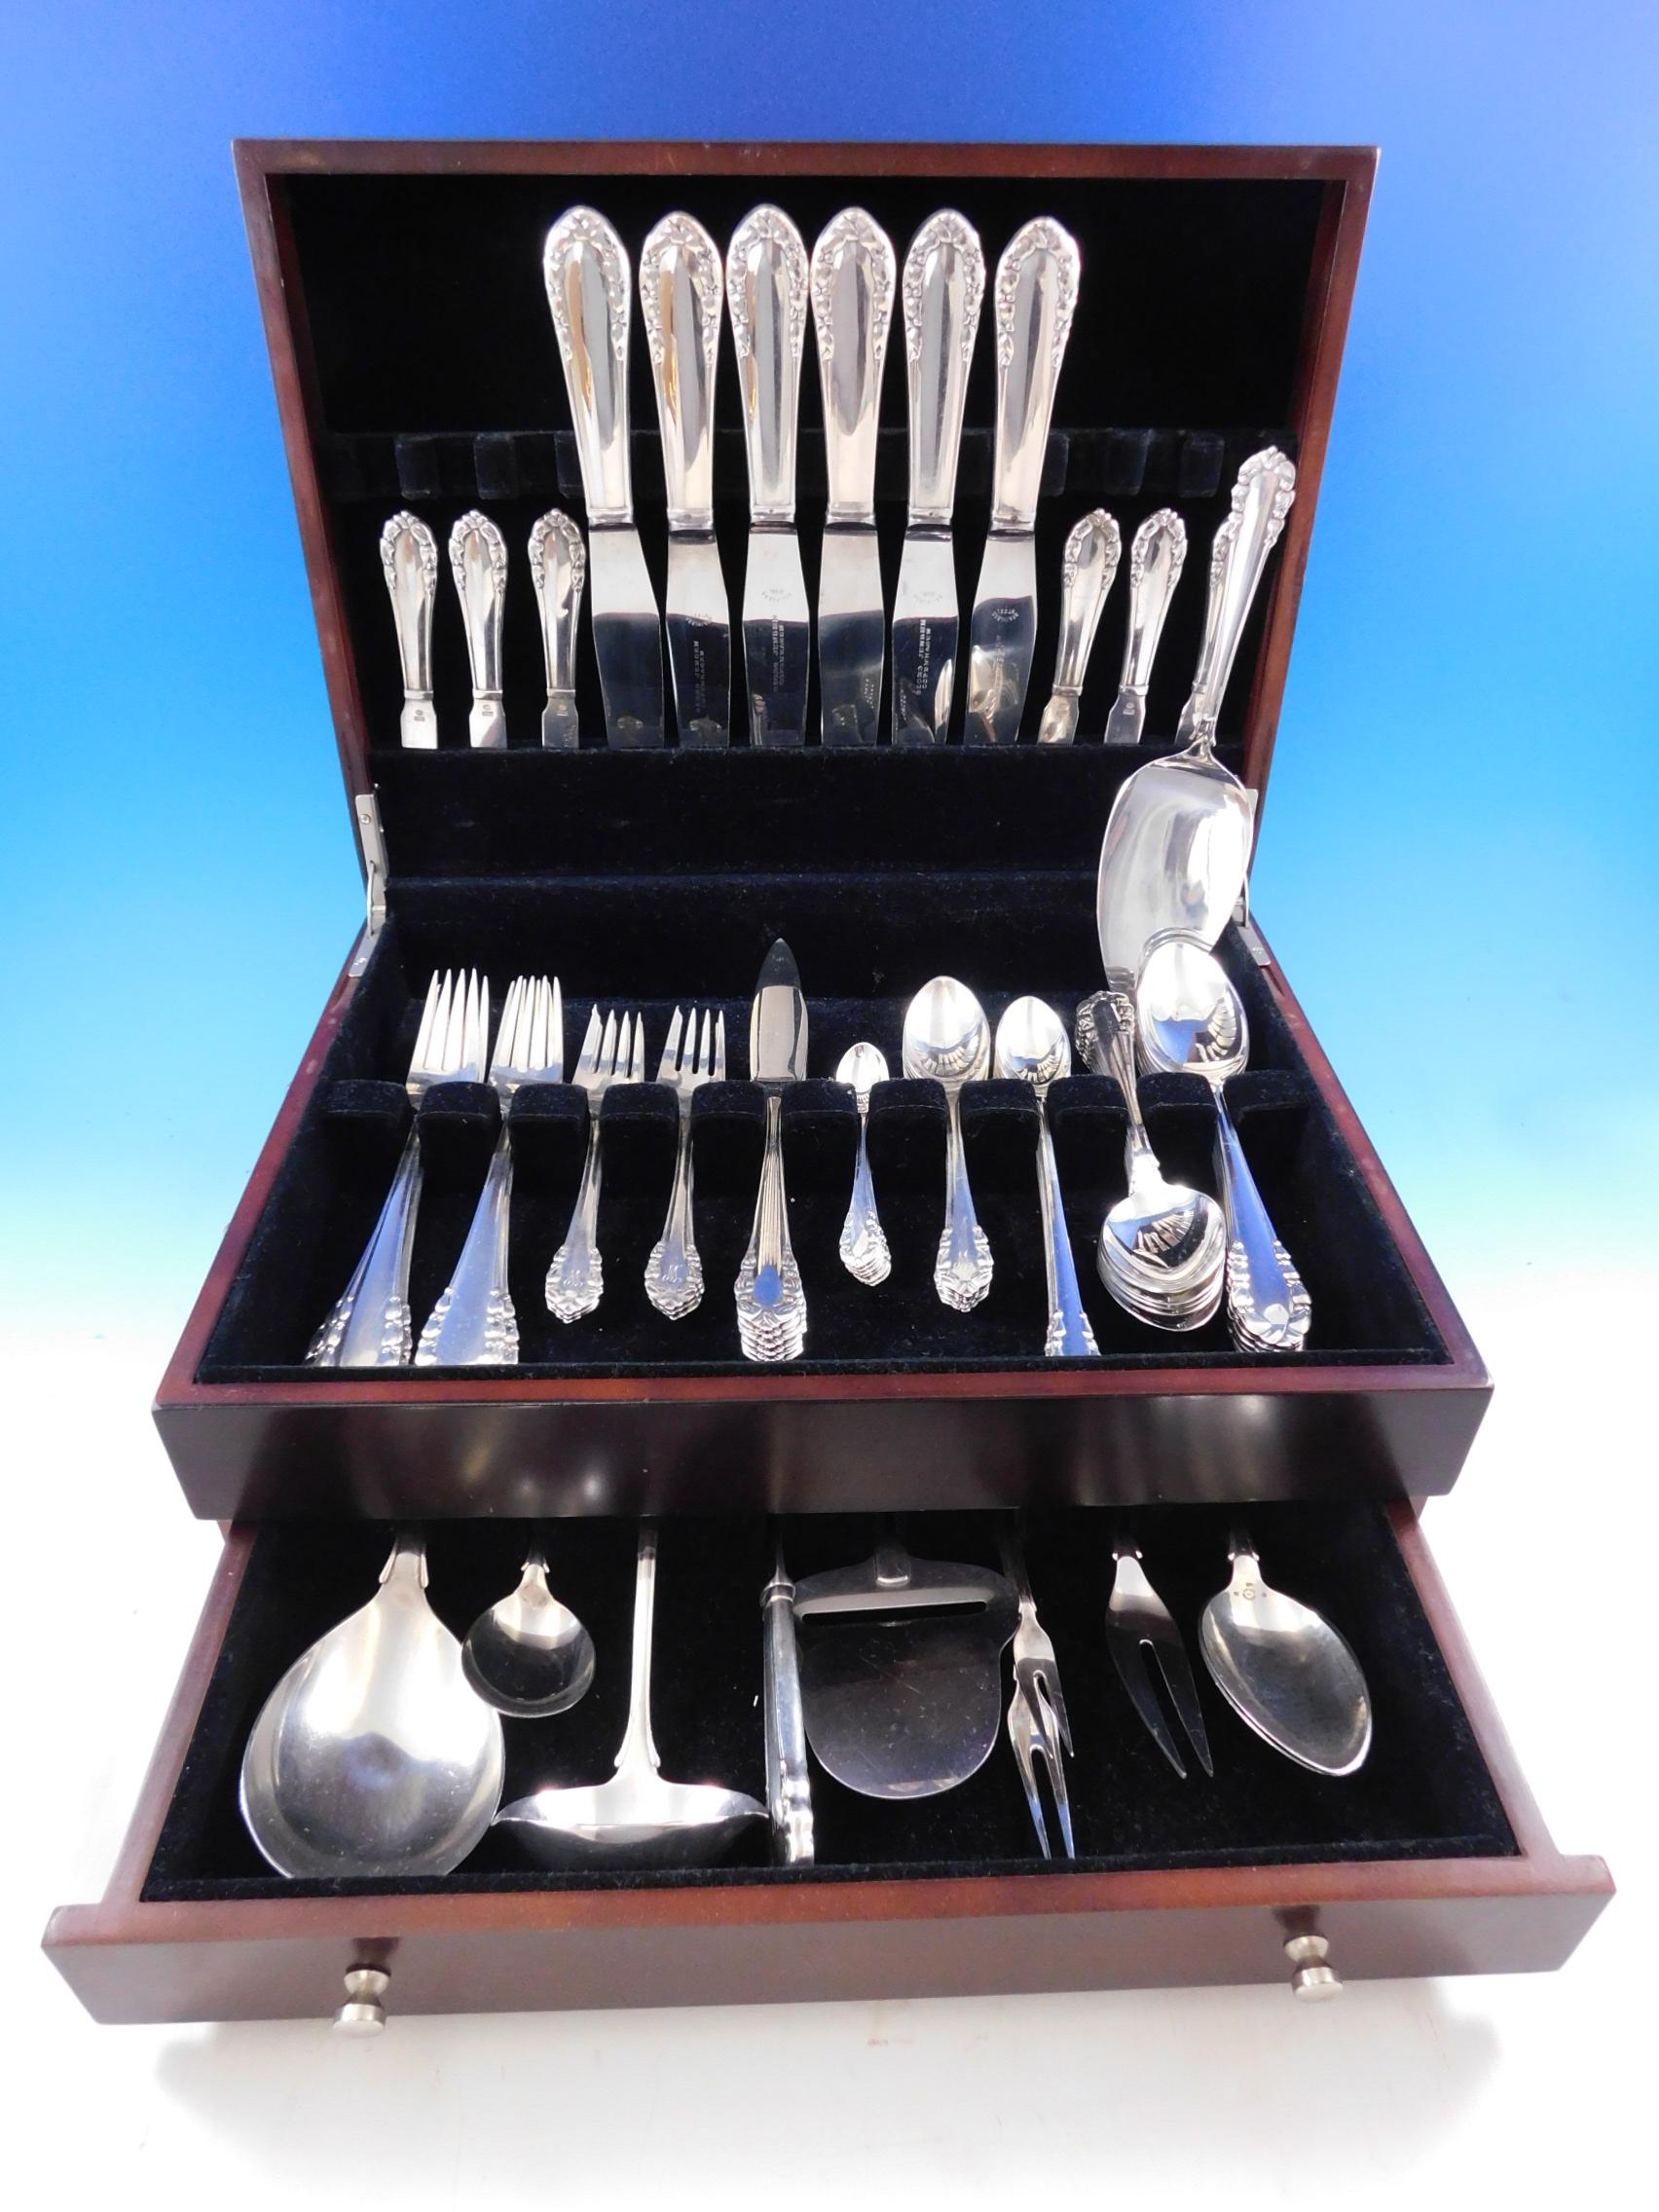 Lily of the Valley by Georg Jensen sterling silver flatware set - 66 pieces. This set includes: 

6 dinner size knives, 9 5/8